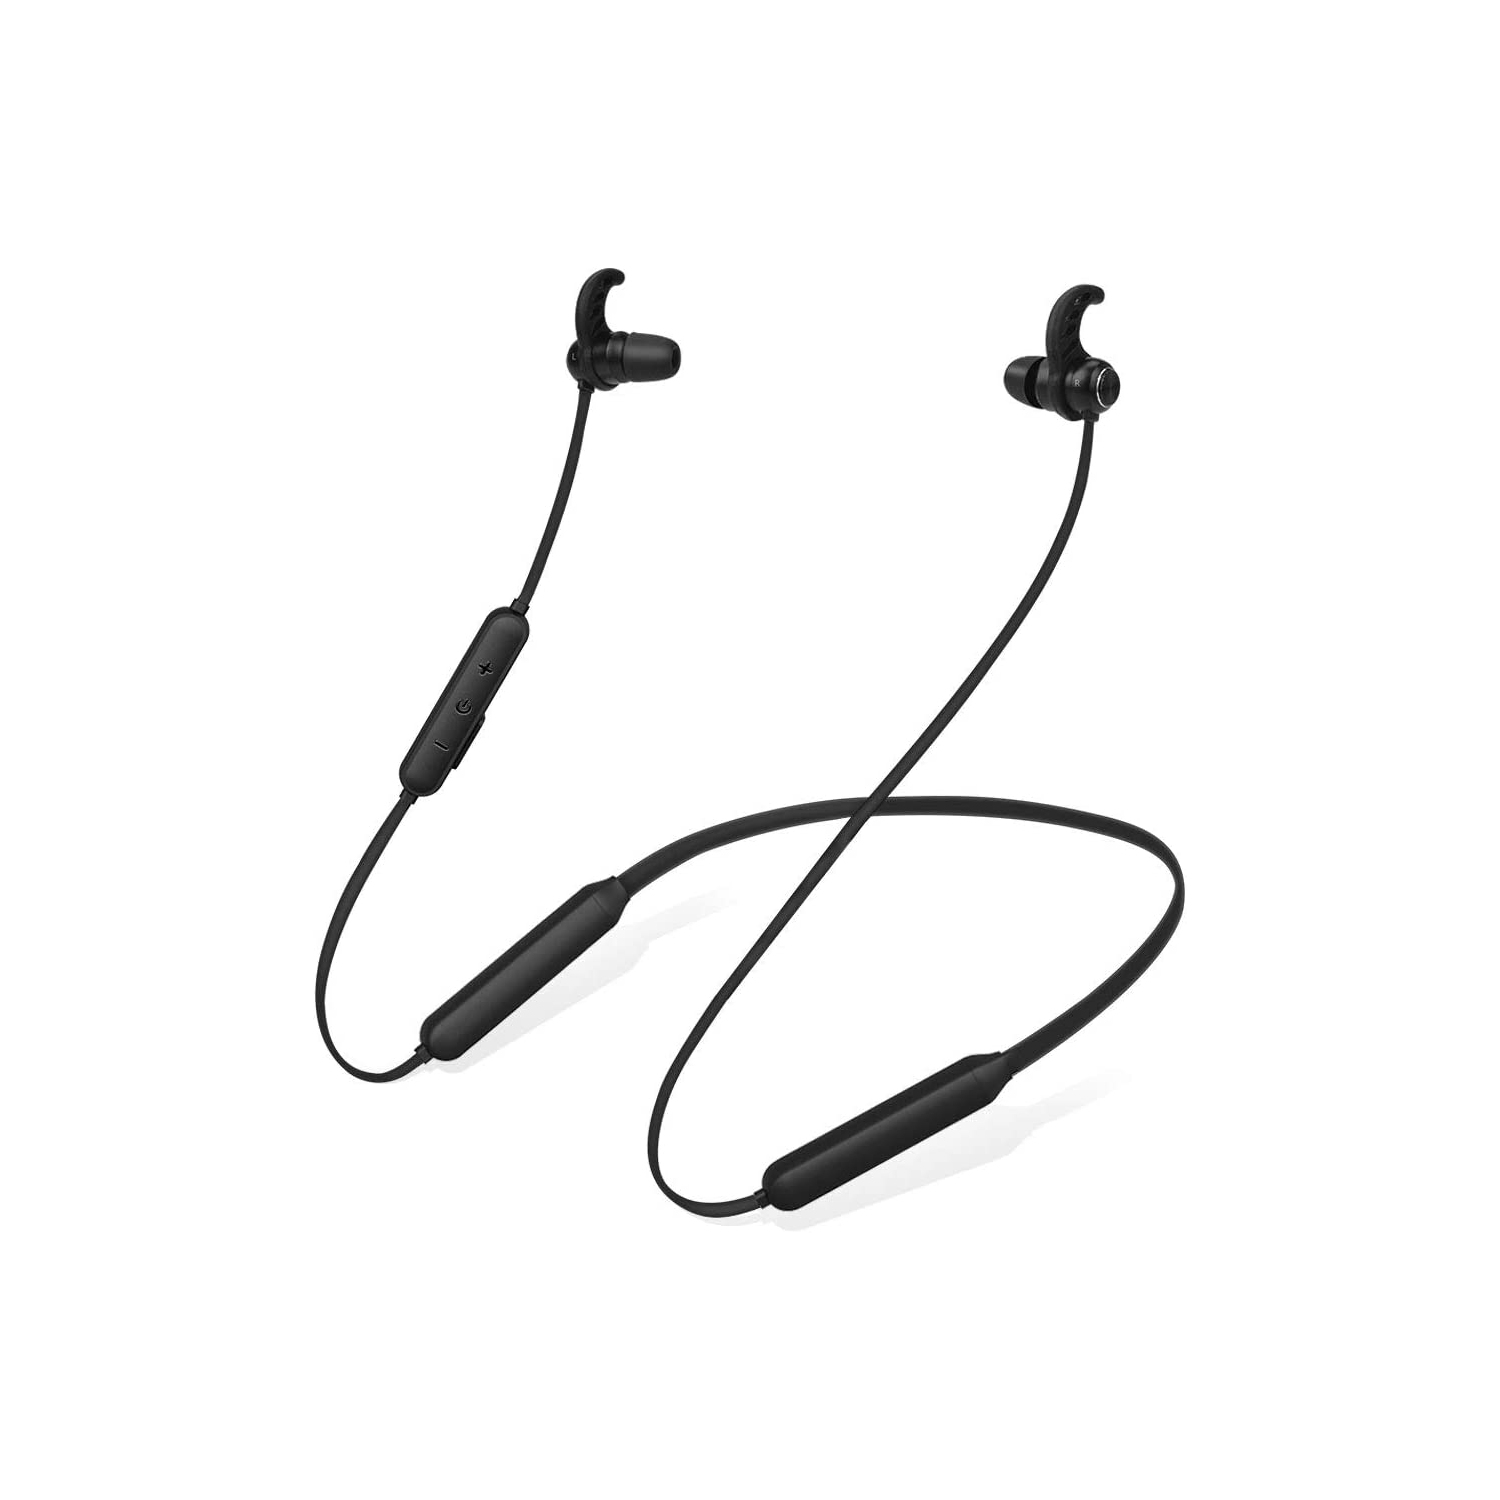 Dolaer Bluetooth Neckband Headphones Earbuds for TV PC, No Delay, 20 Hrs Playtime Wireless Earphones with Mic, Magnetic, Light & Comfortable, Compatible with iPhone Cell Phones, Wo